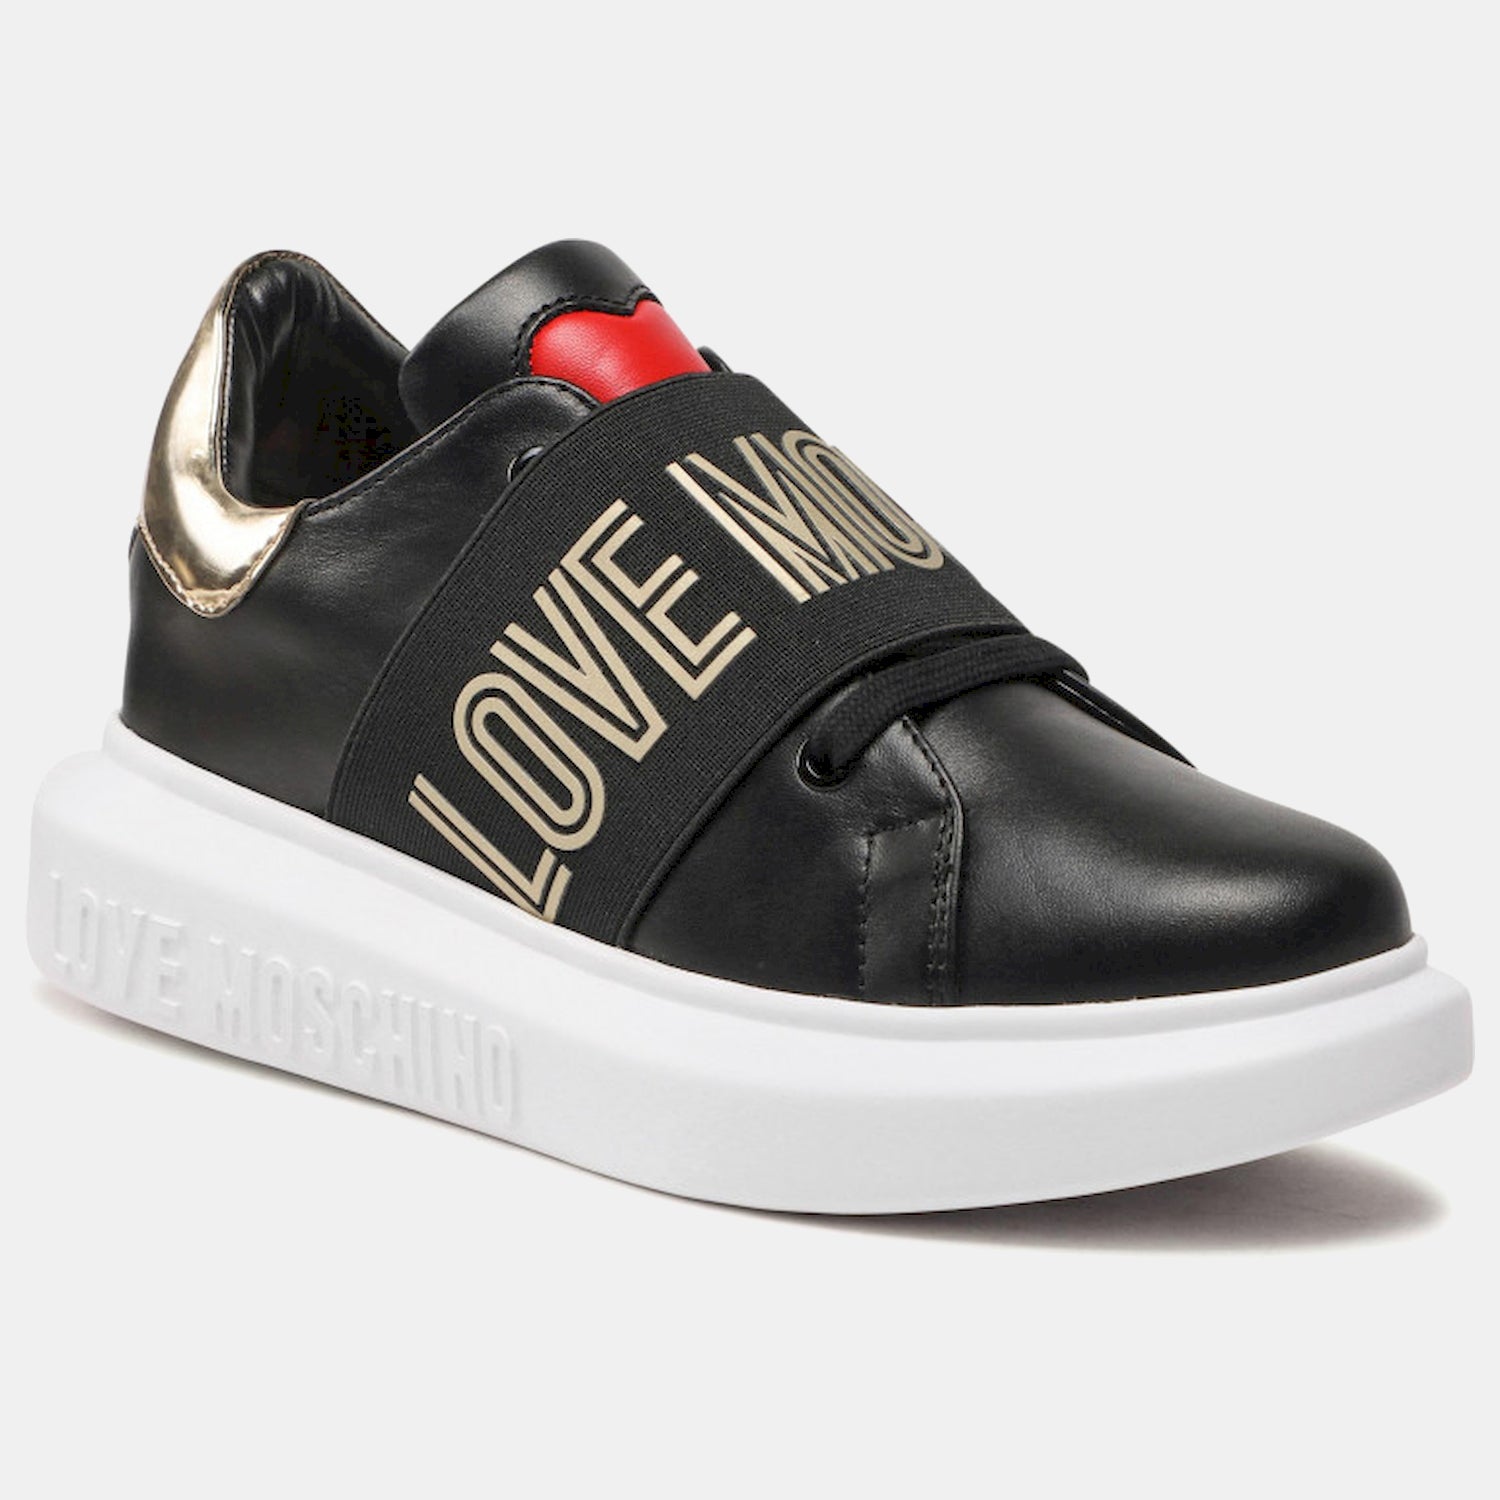 Moschino Sapatilhas Sneakers Shoes Ja15104 Blk Gold Preto Ouro_shot1